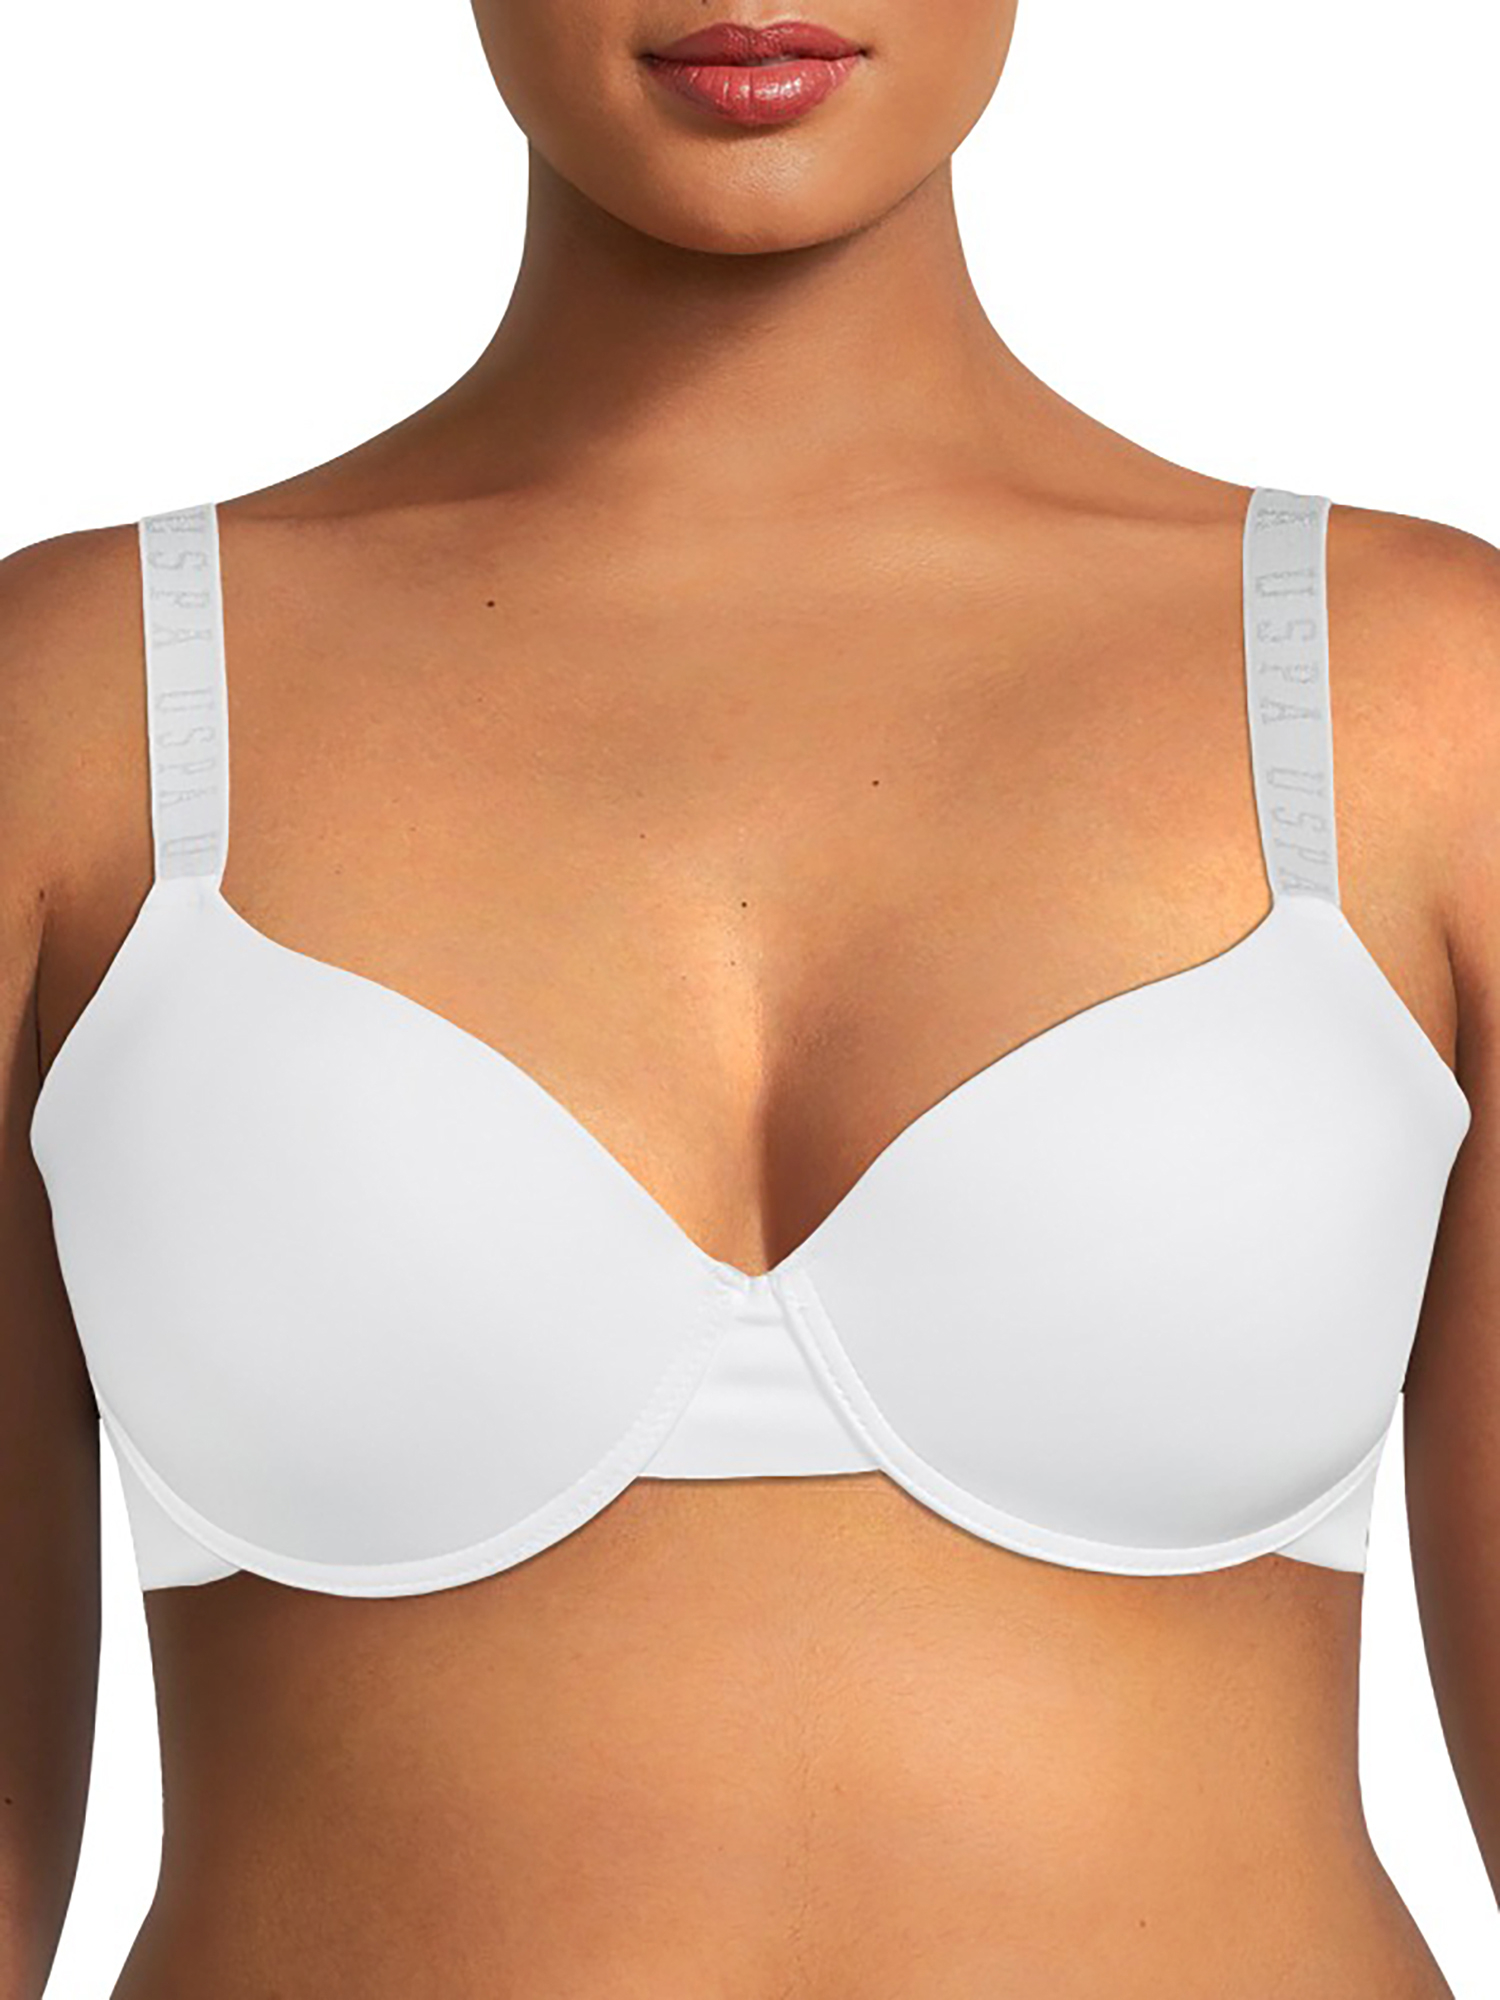 U.S. Polo Assn. Women's Plus Size Tag-Free Microfiber Bra with Gentle Lift, 2-Pack - image 2 of 4